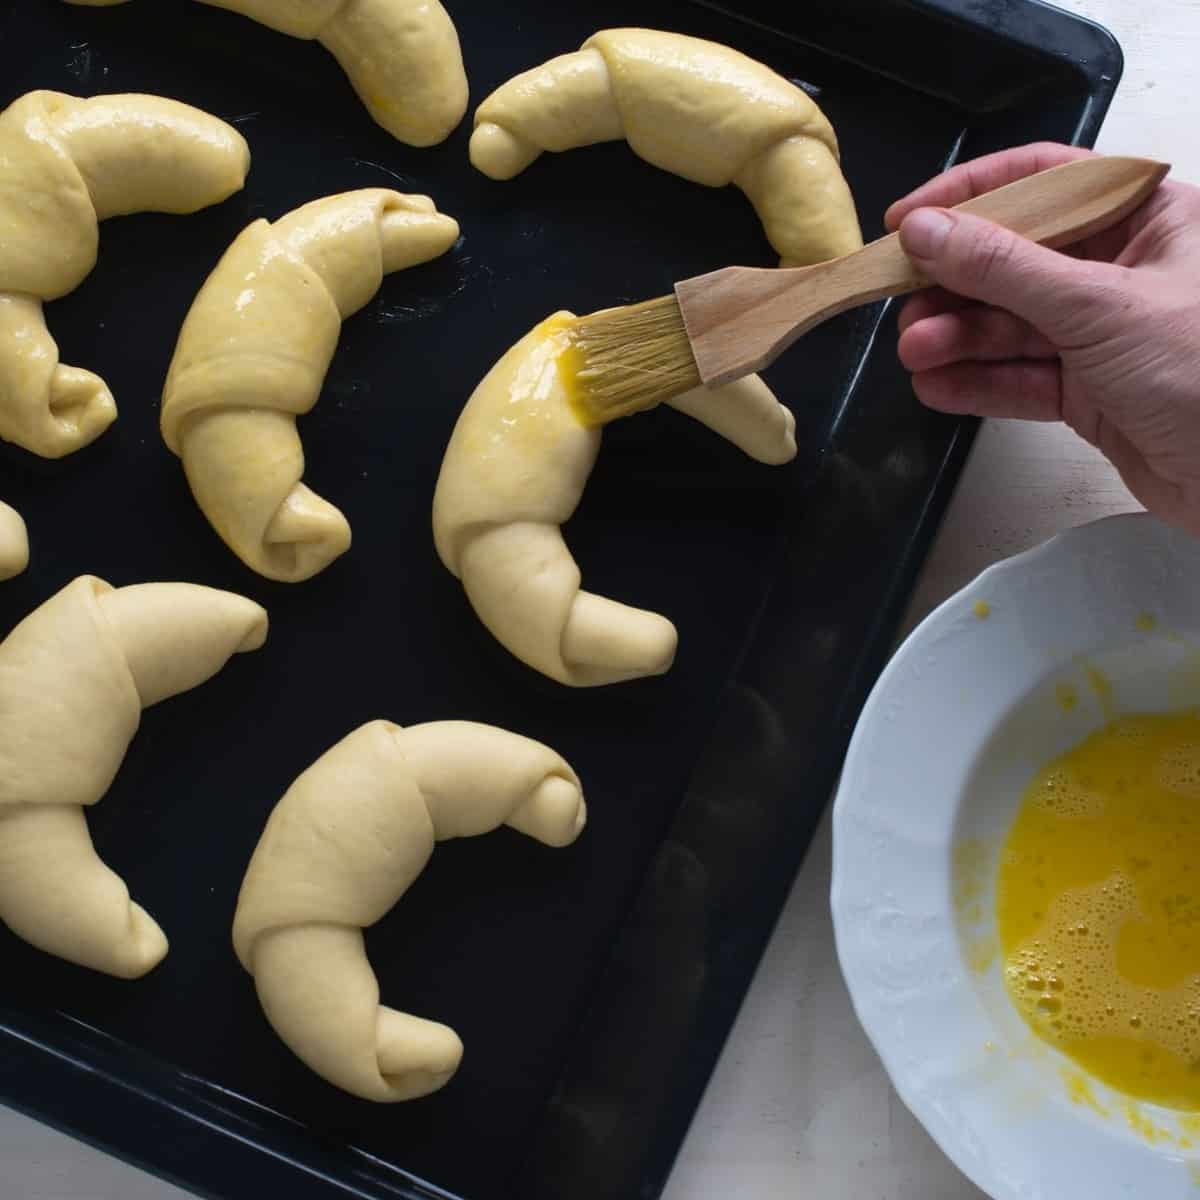 Brushing loupacky crescent rolls with egg wash.